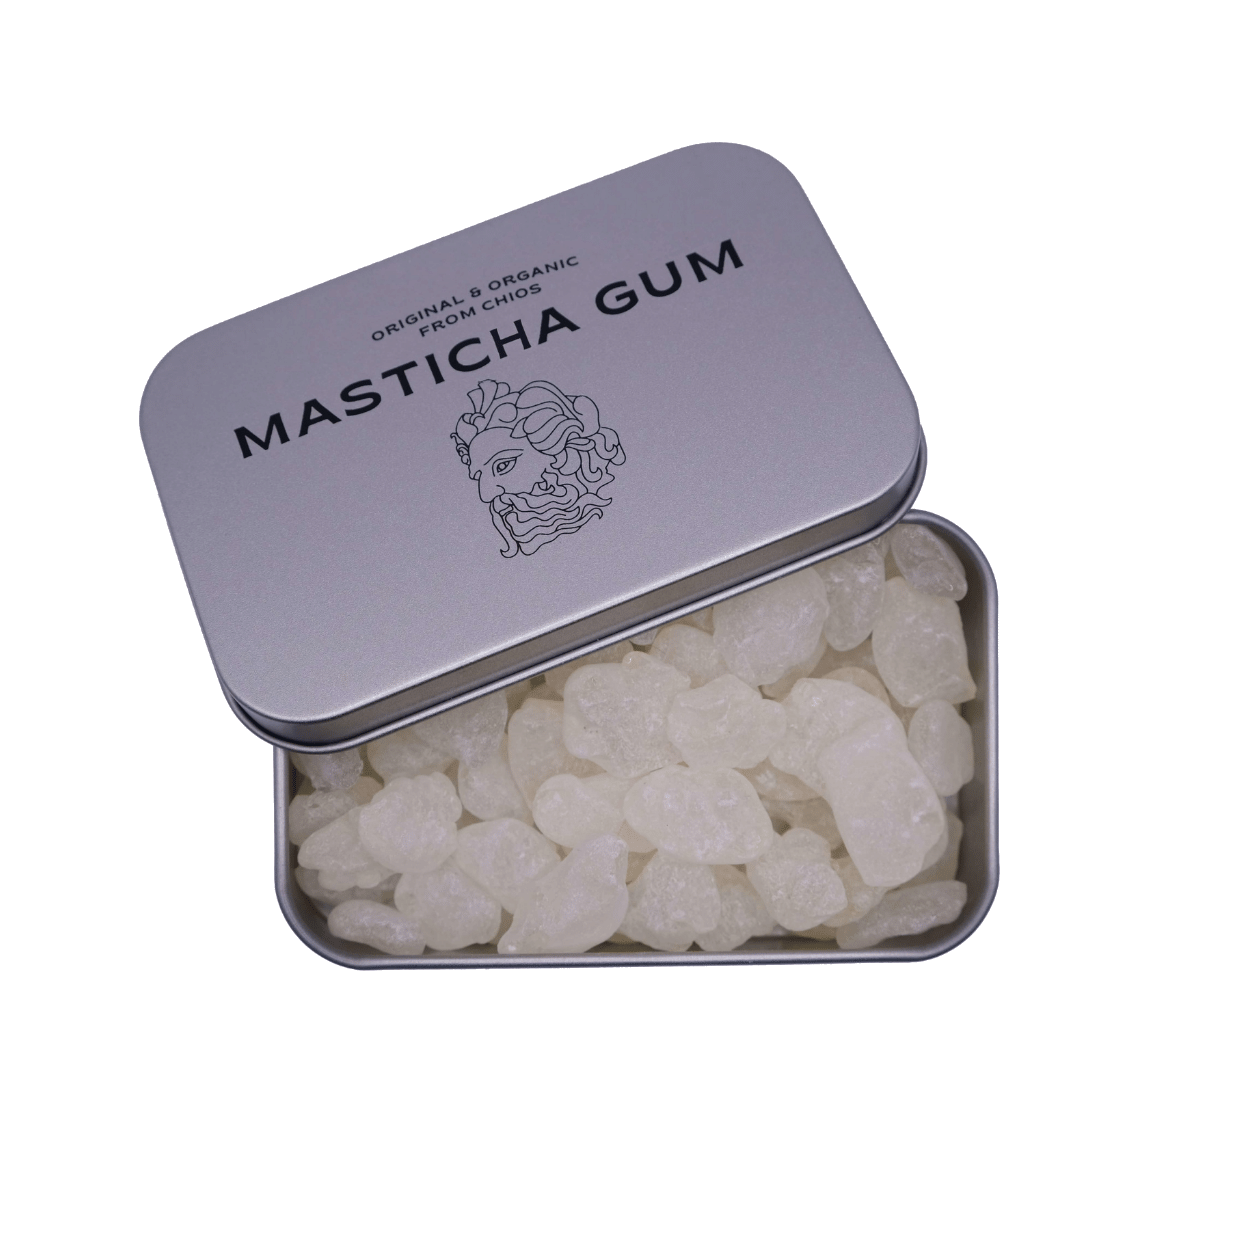 30-Day Supply Natural Mastic Gum from Chios, Greece